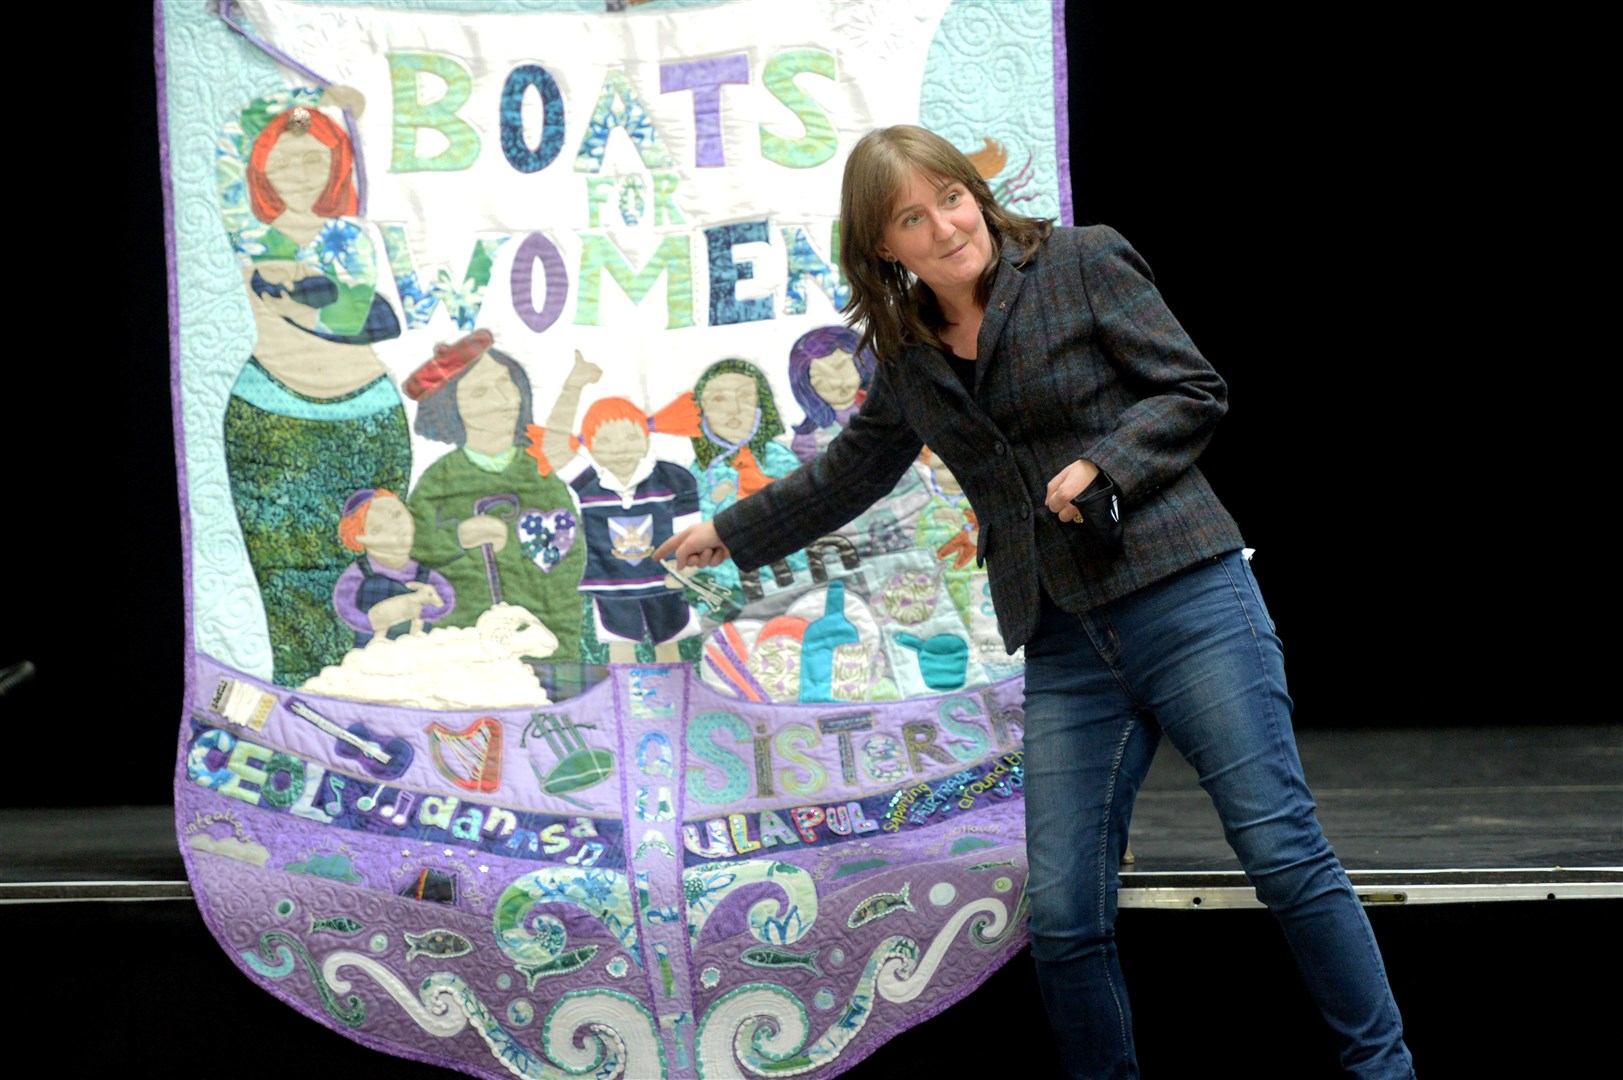 Maree Todd MSP points out the cut-up rugby shirt given to the Katie Morag character on the Boats for Women banner. Picture: James Mackenzie